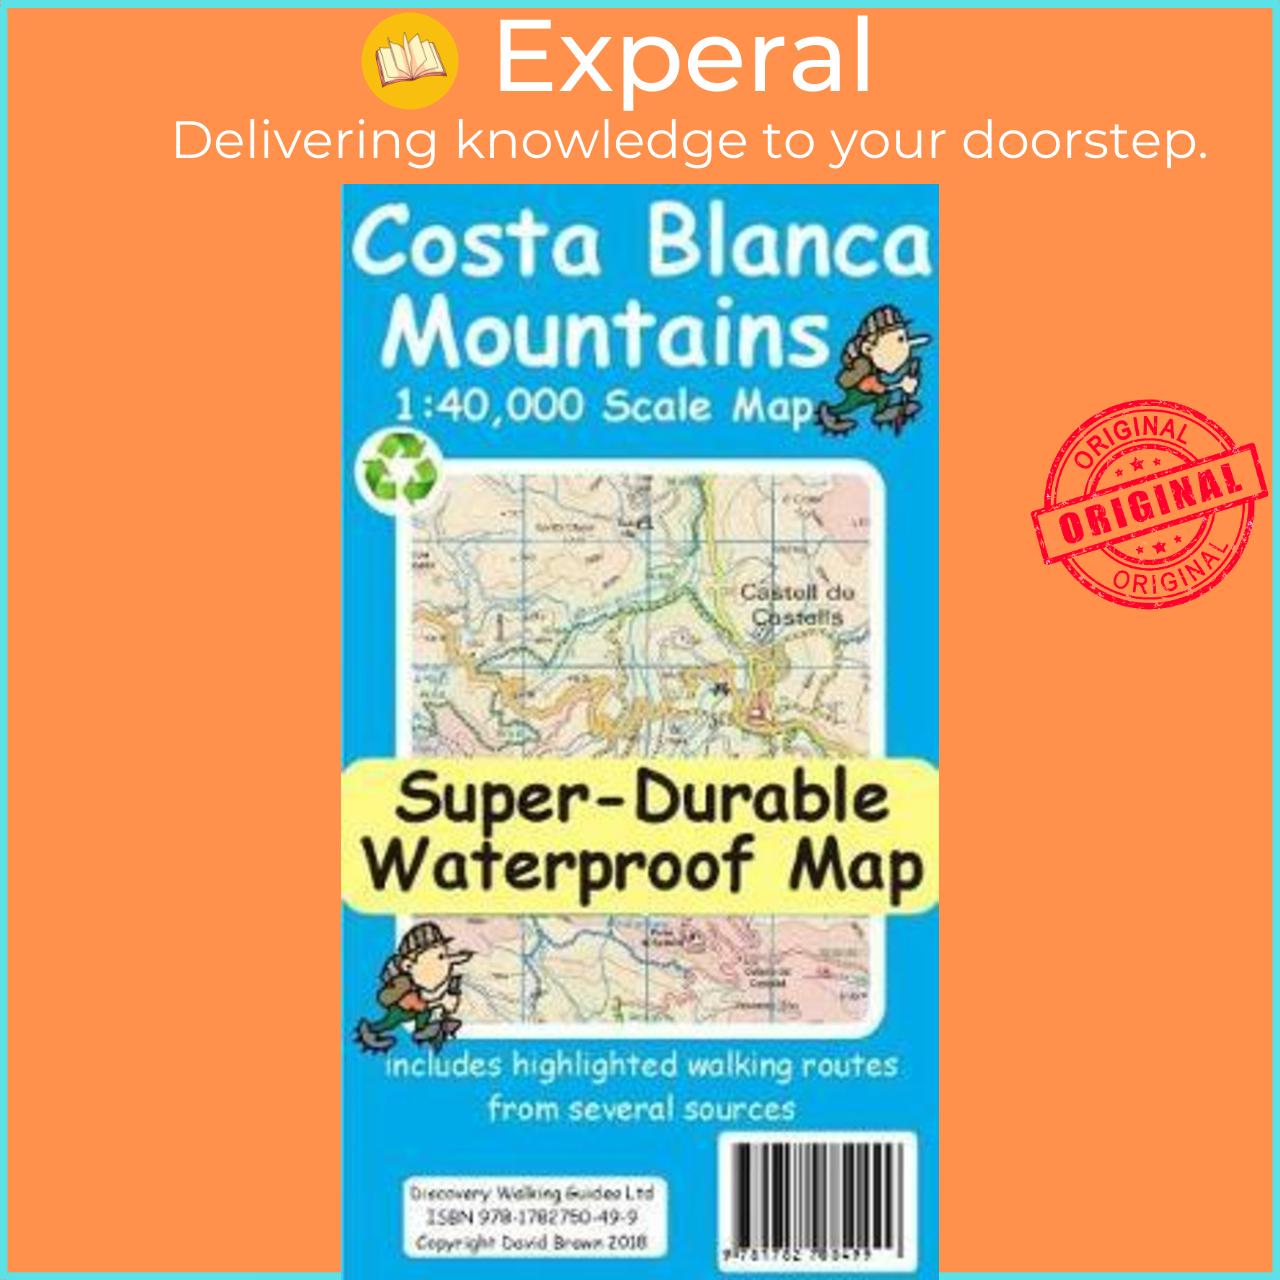 Sách - Costa Blanca Mountains Tour & Trail Super-Durable Map by David Brawn (UK edition, paperback)